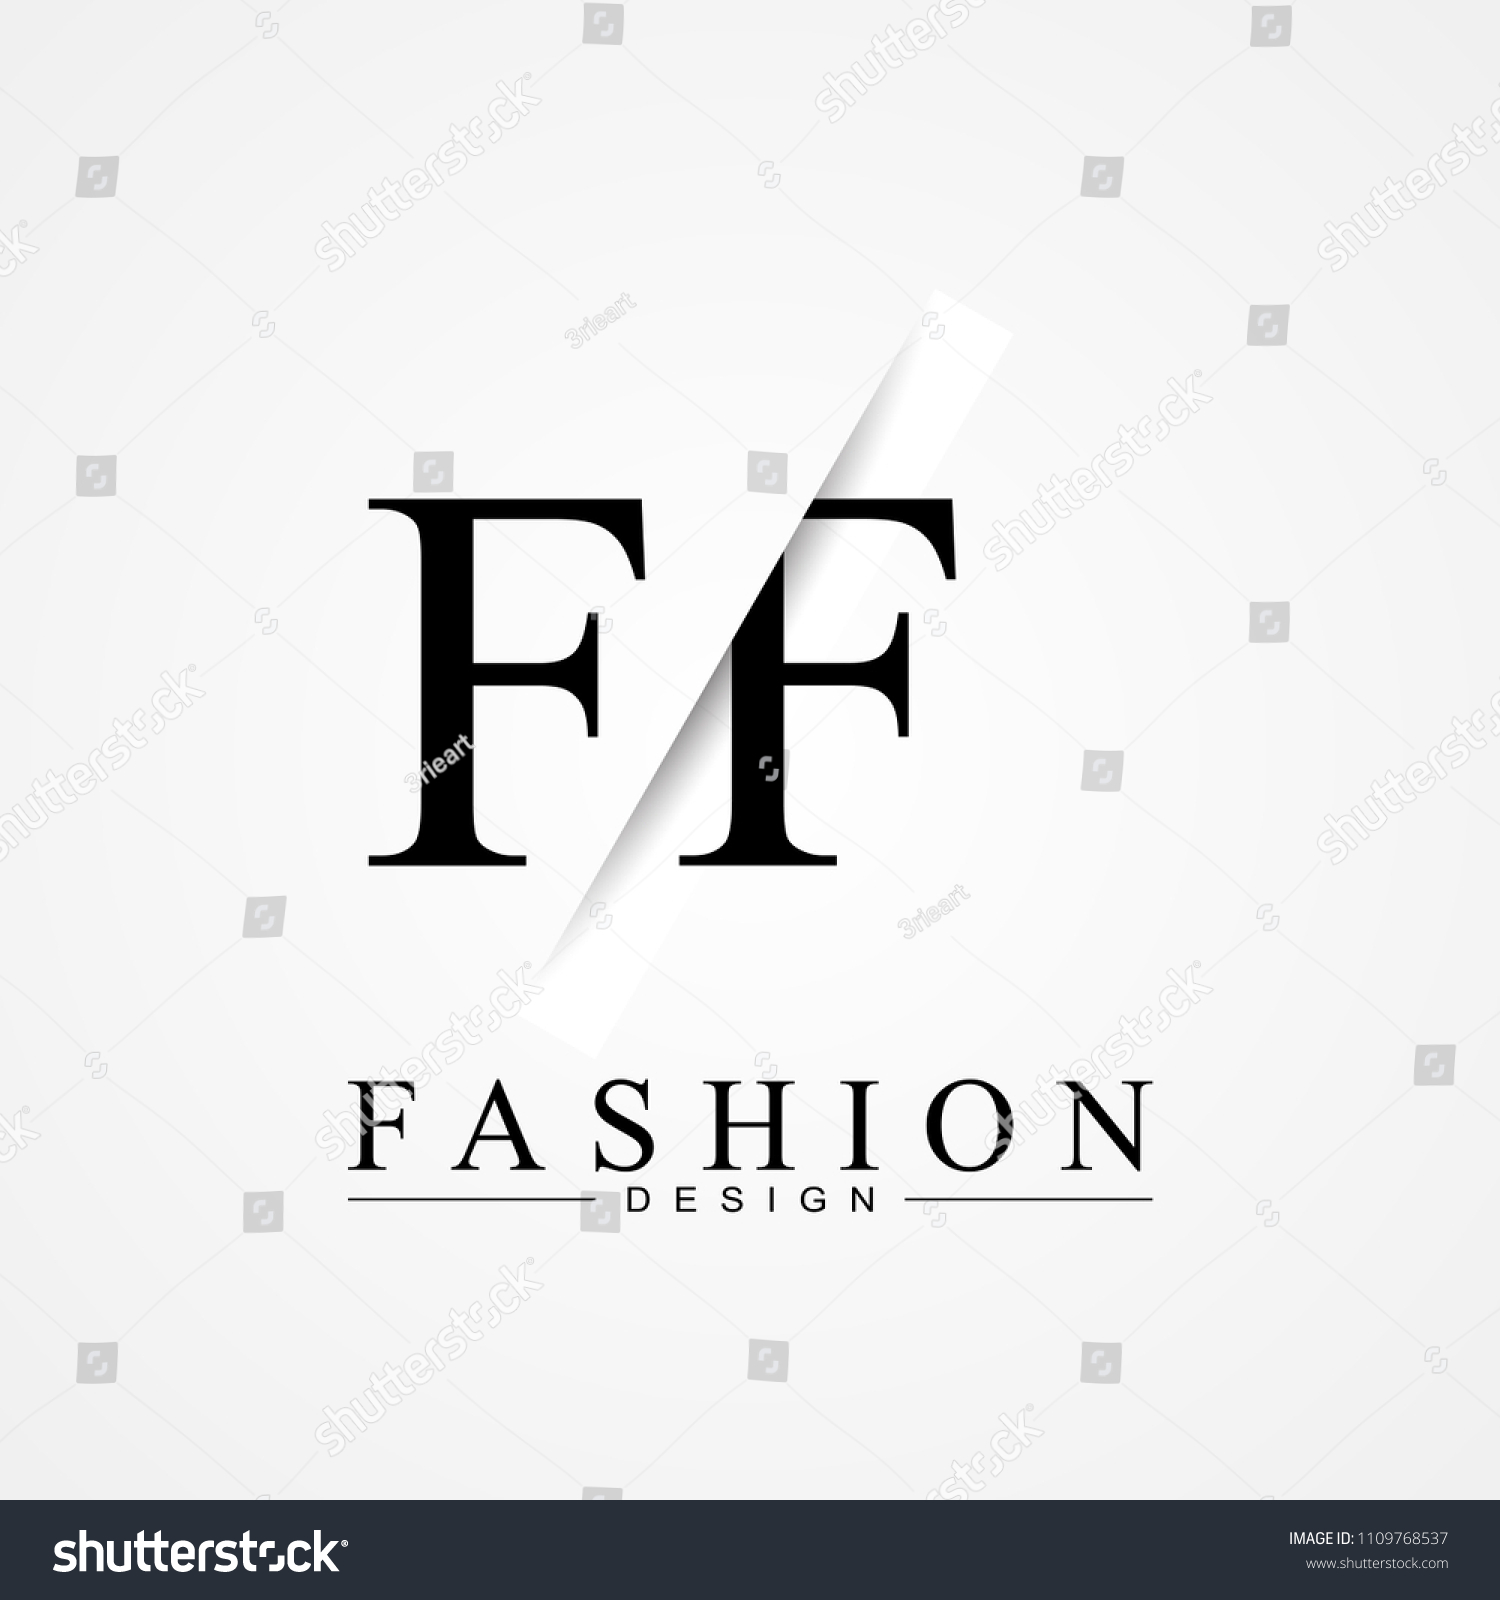 Ff F F Cutting Linked Letter Stock 